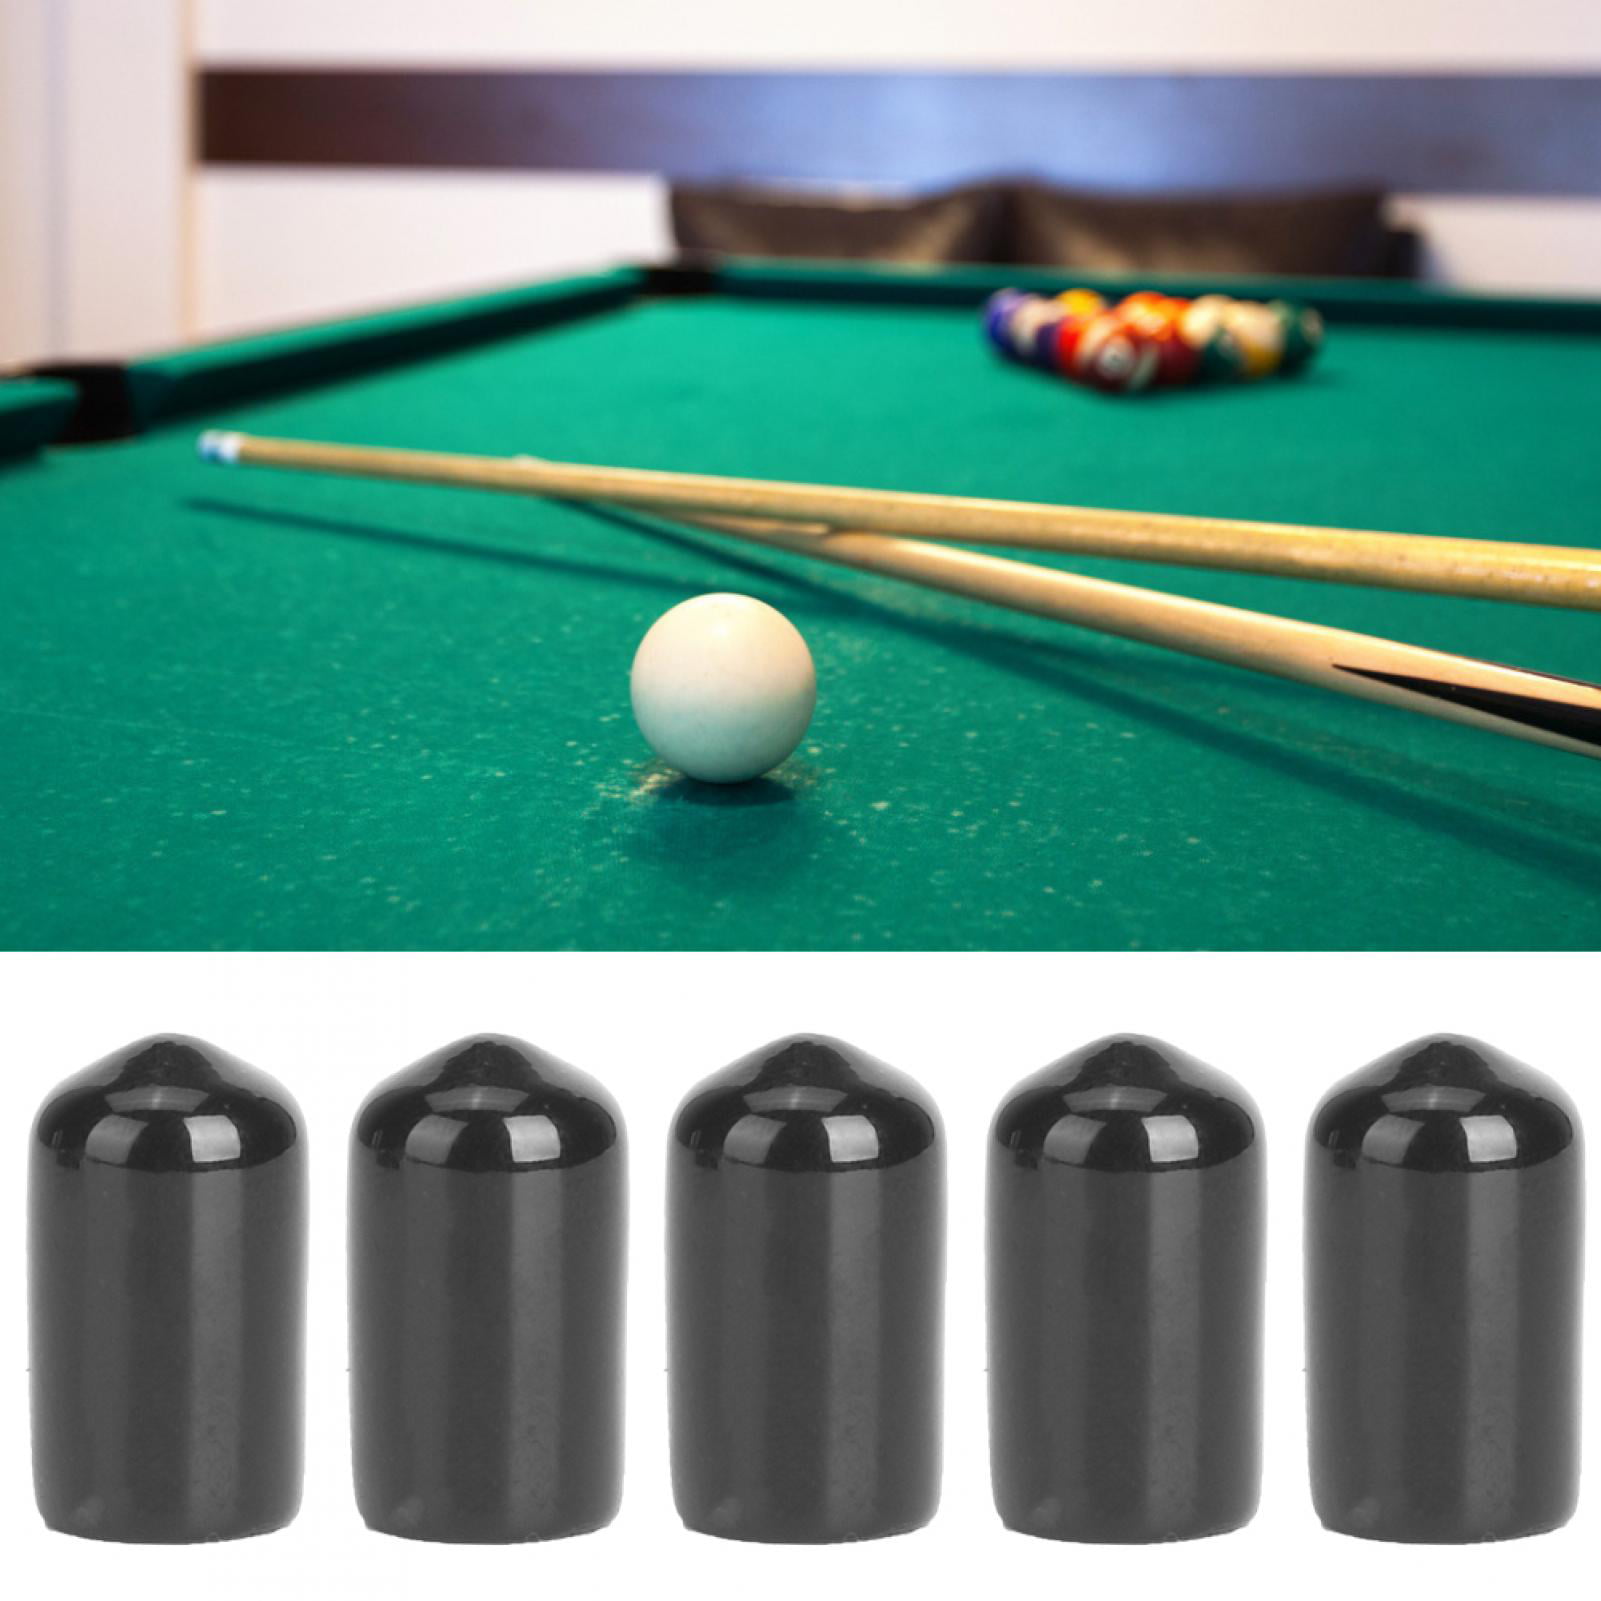 Details about   10pcs Durable Pool Cue Tip Protector Billiards Snooker Rod Cover Accessory 